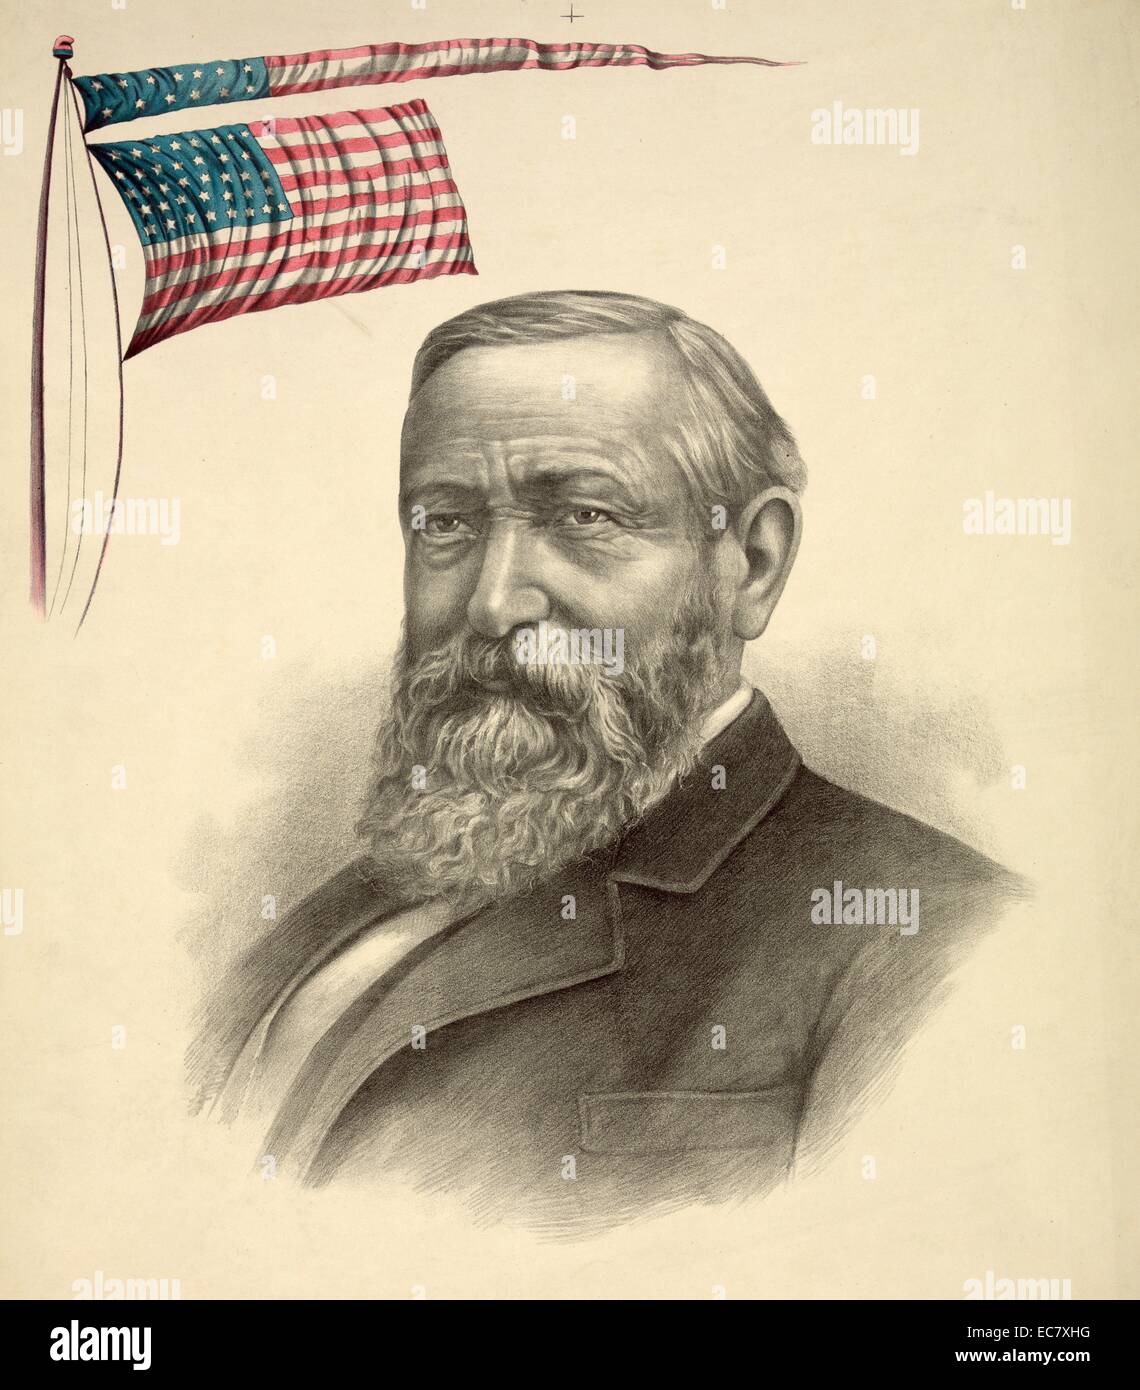 President Benjamin Harrison. Harrison was the 23rd President of the United States. He became a prominent local attorney, Presbyterian church leader and politician in Indiana before his election. Stock Photo